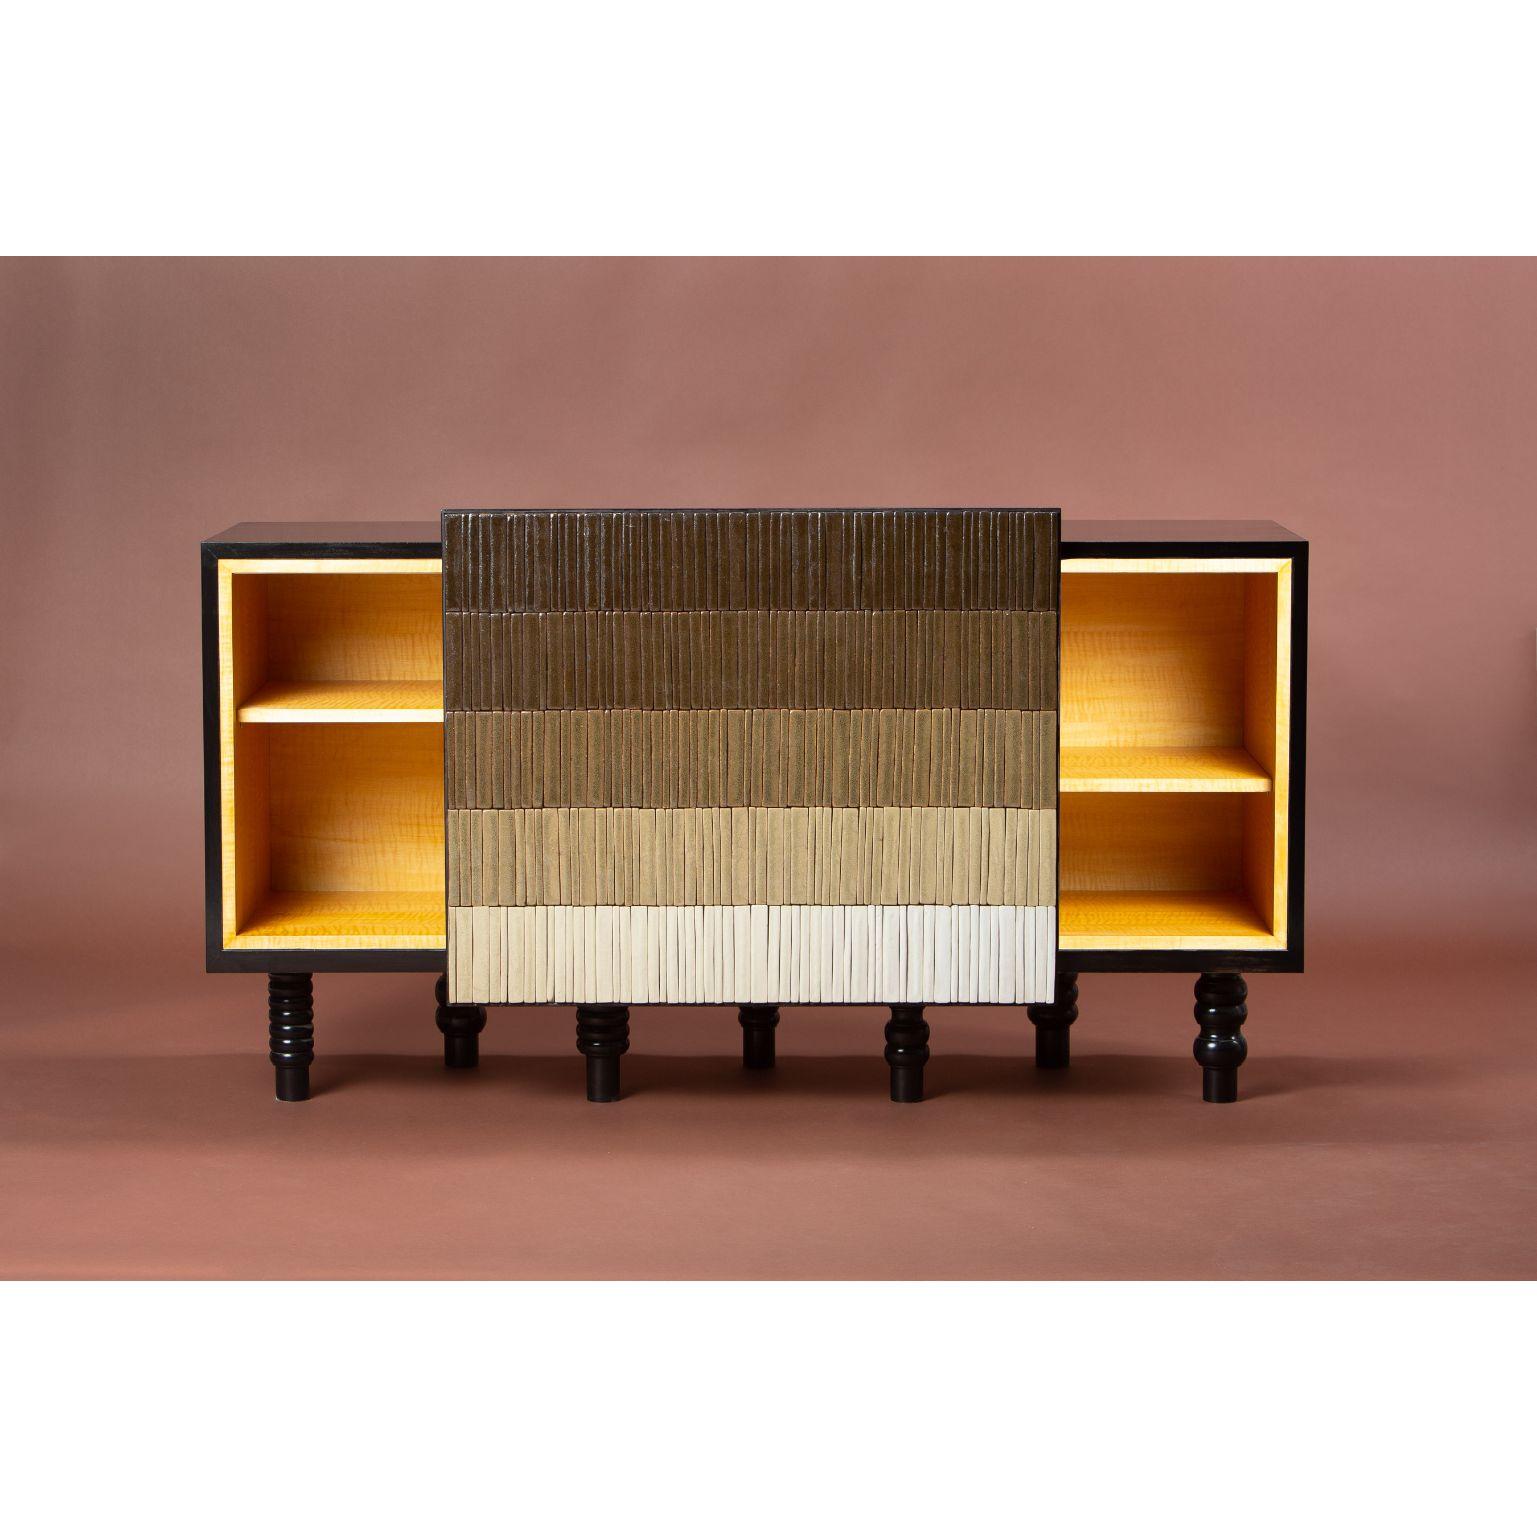 Gradient cabinet - brown by Milan Pekar, Jakub Vávra
Dimensions: 180 x 45 x 70 cm
Materials: Glaze, ceramic

Hand crafted in the Czech Republic

Gradient is an original furniture collection combining exotic wood and ceramic mosaic, developed